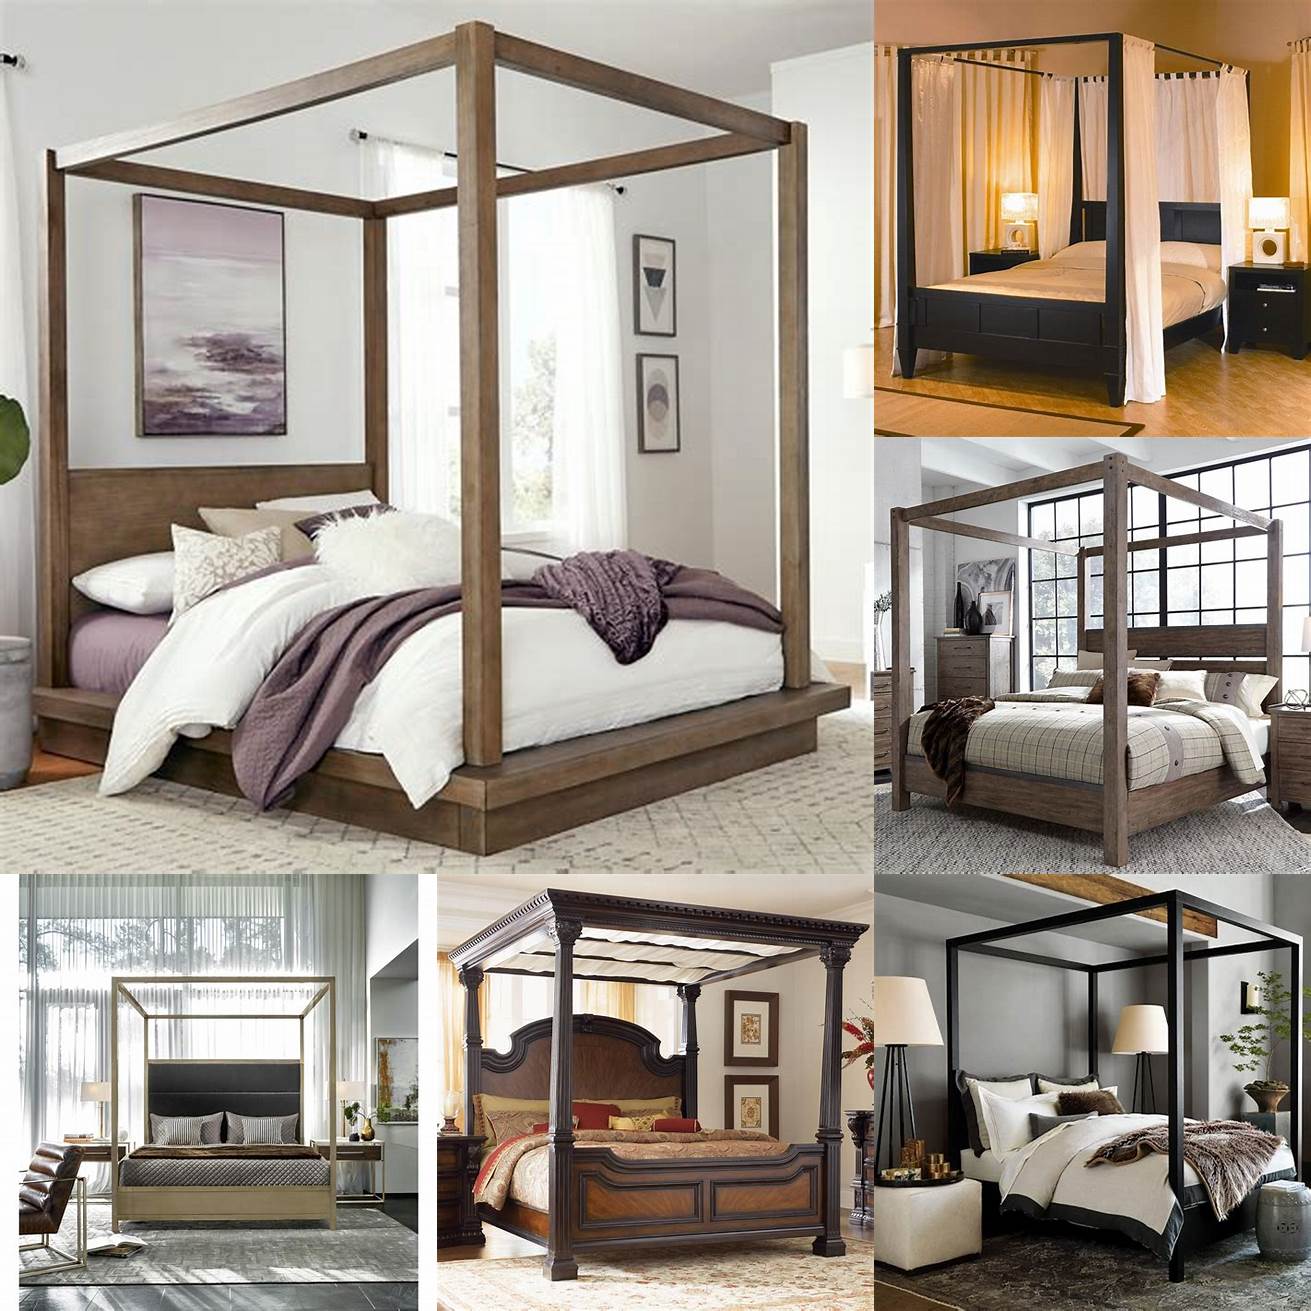 Modern king bed with canopy